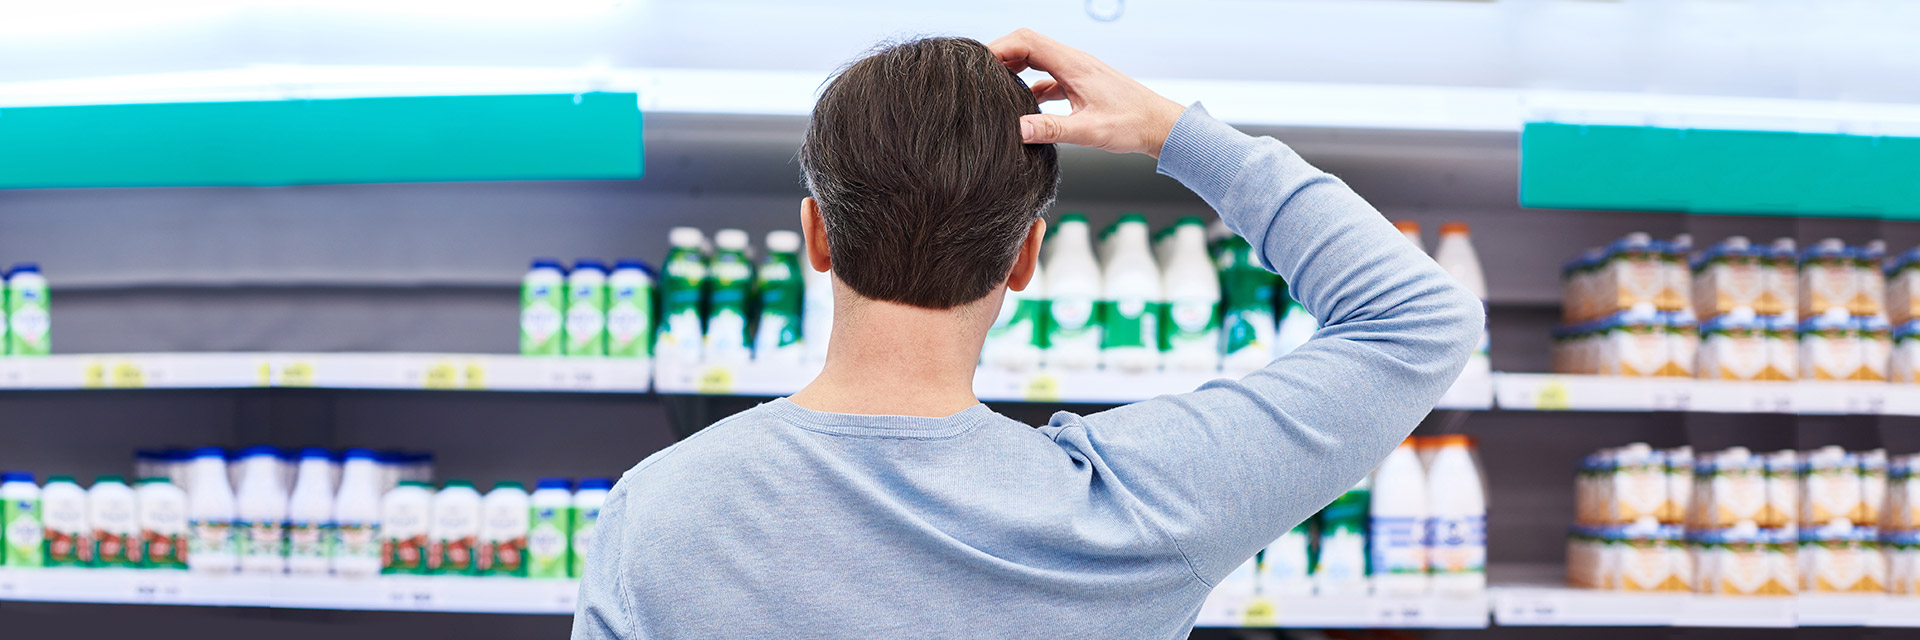 Man choosing product in grocery store